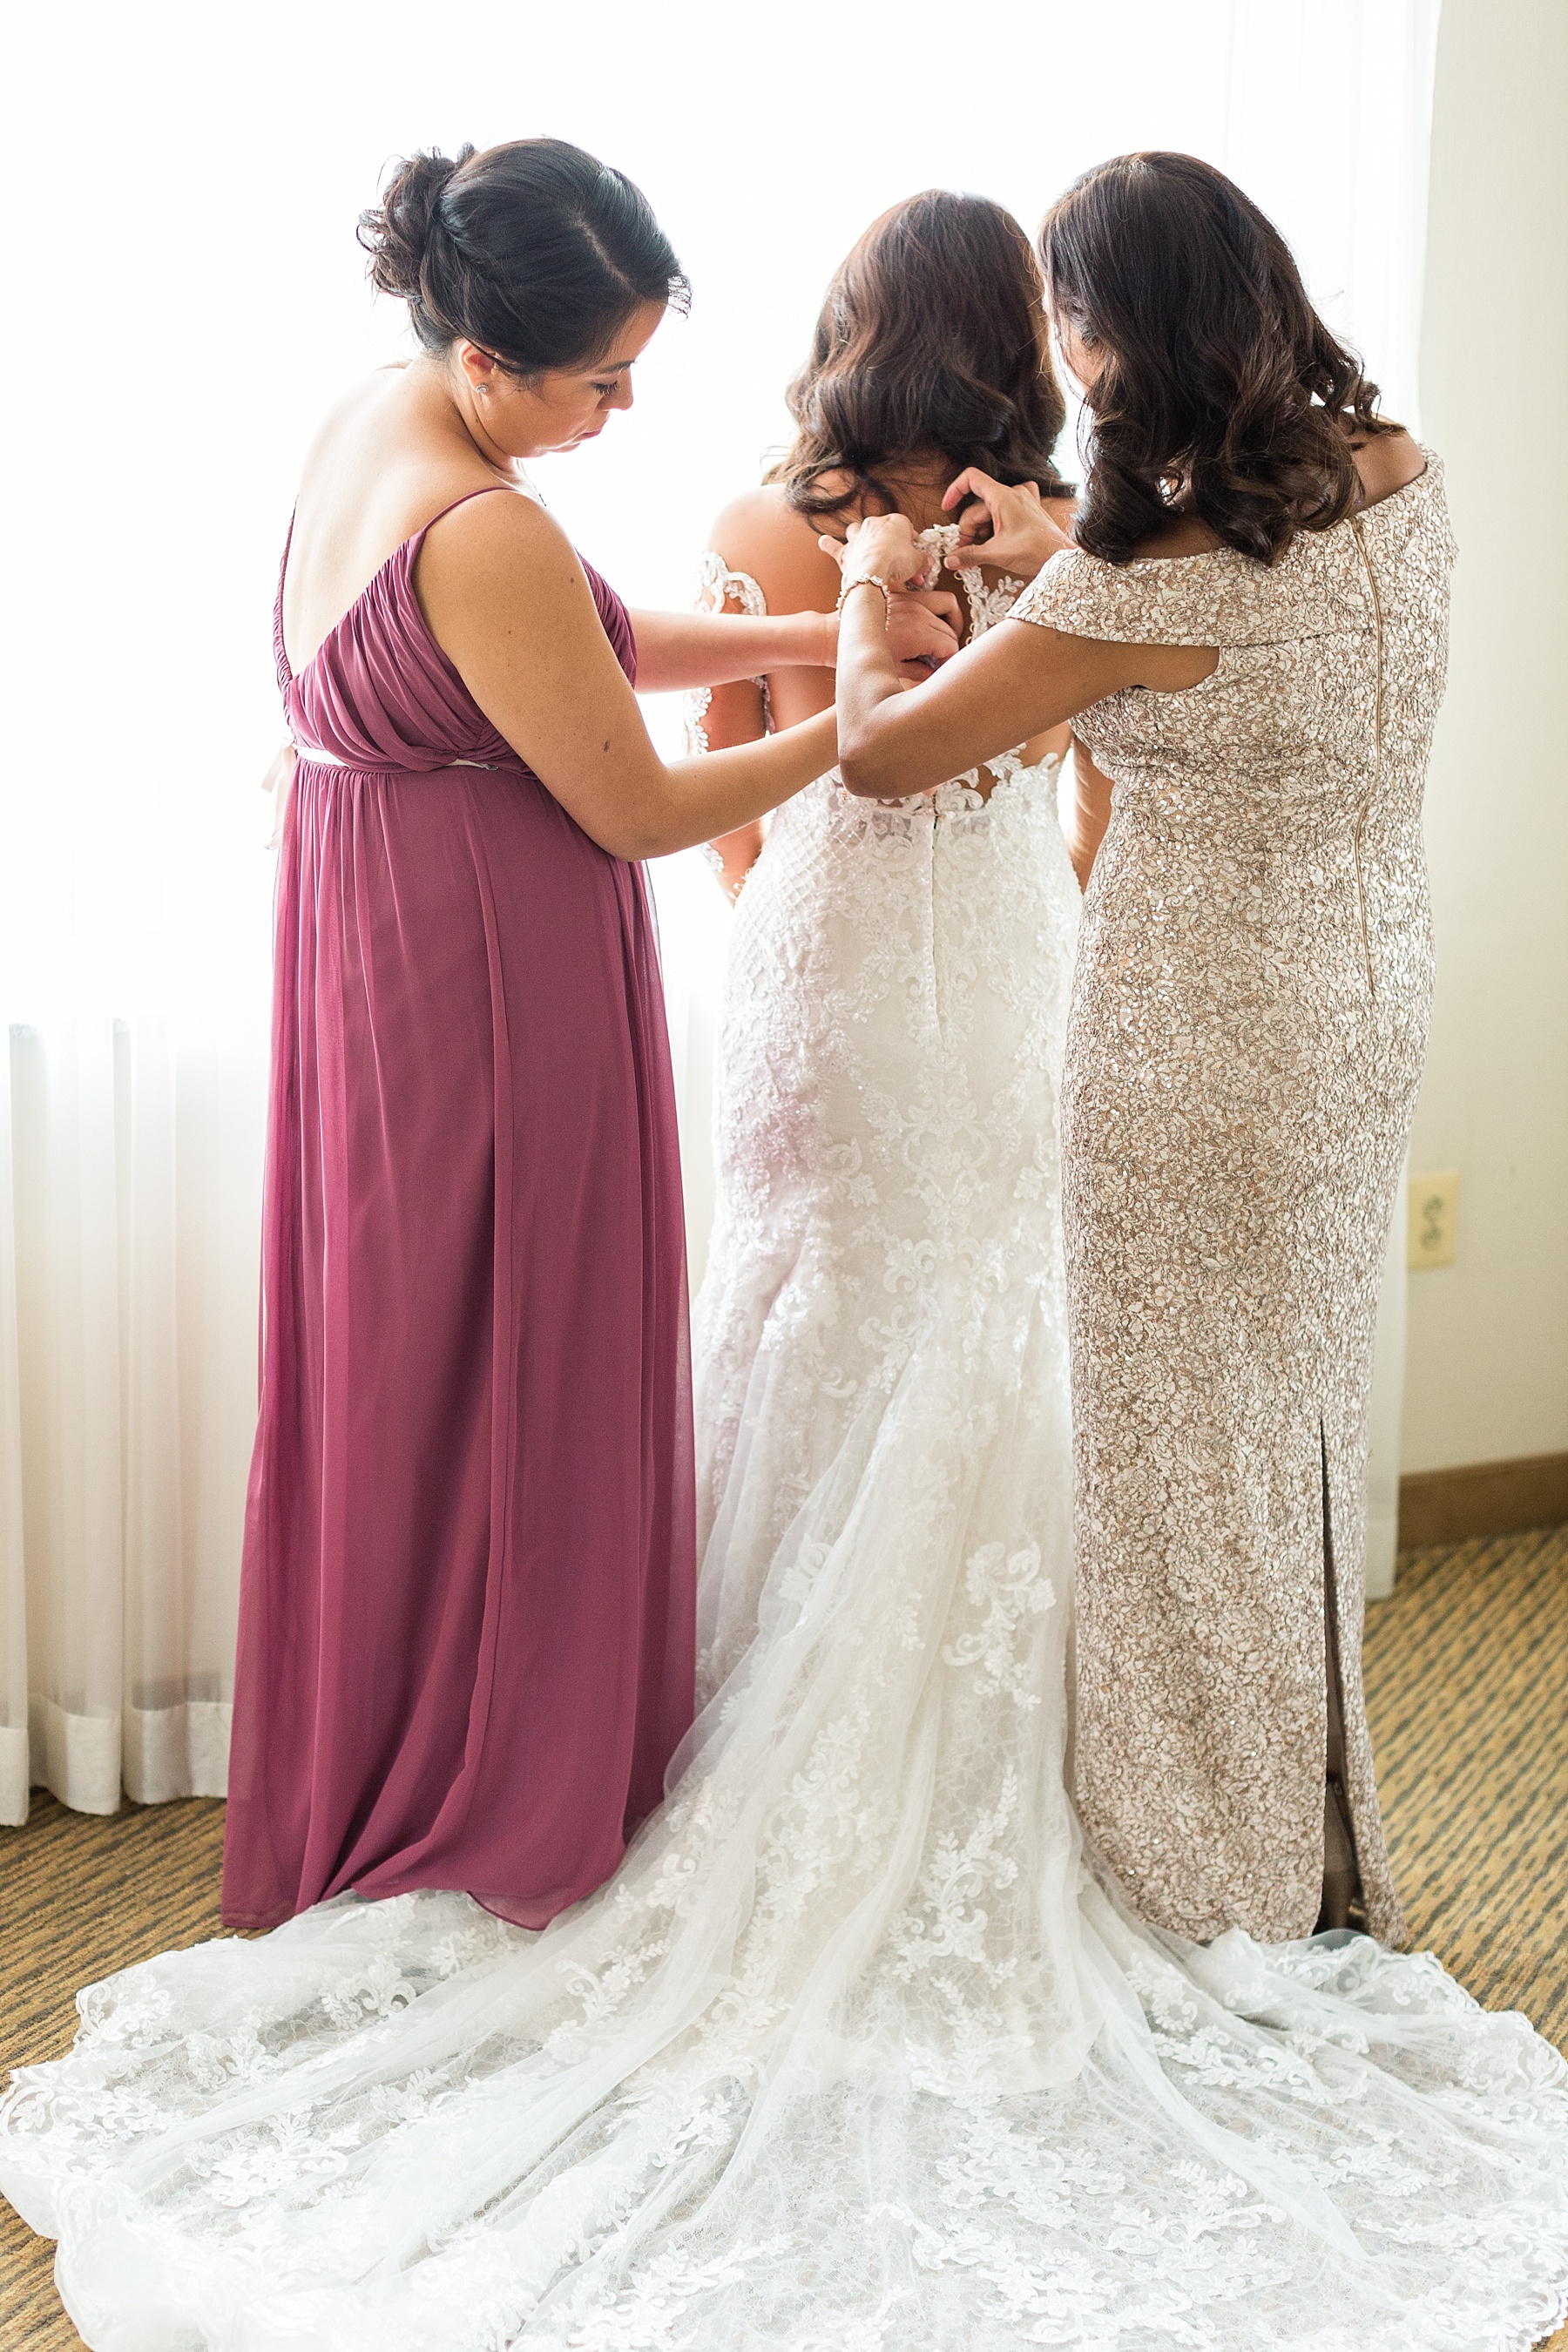 wedding day preparations with the bride by Alexandra Mandato Photography